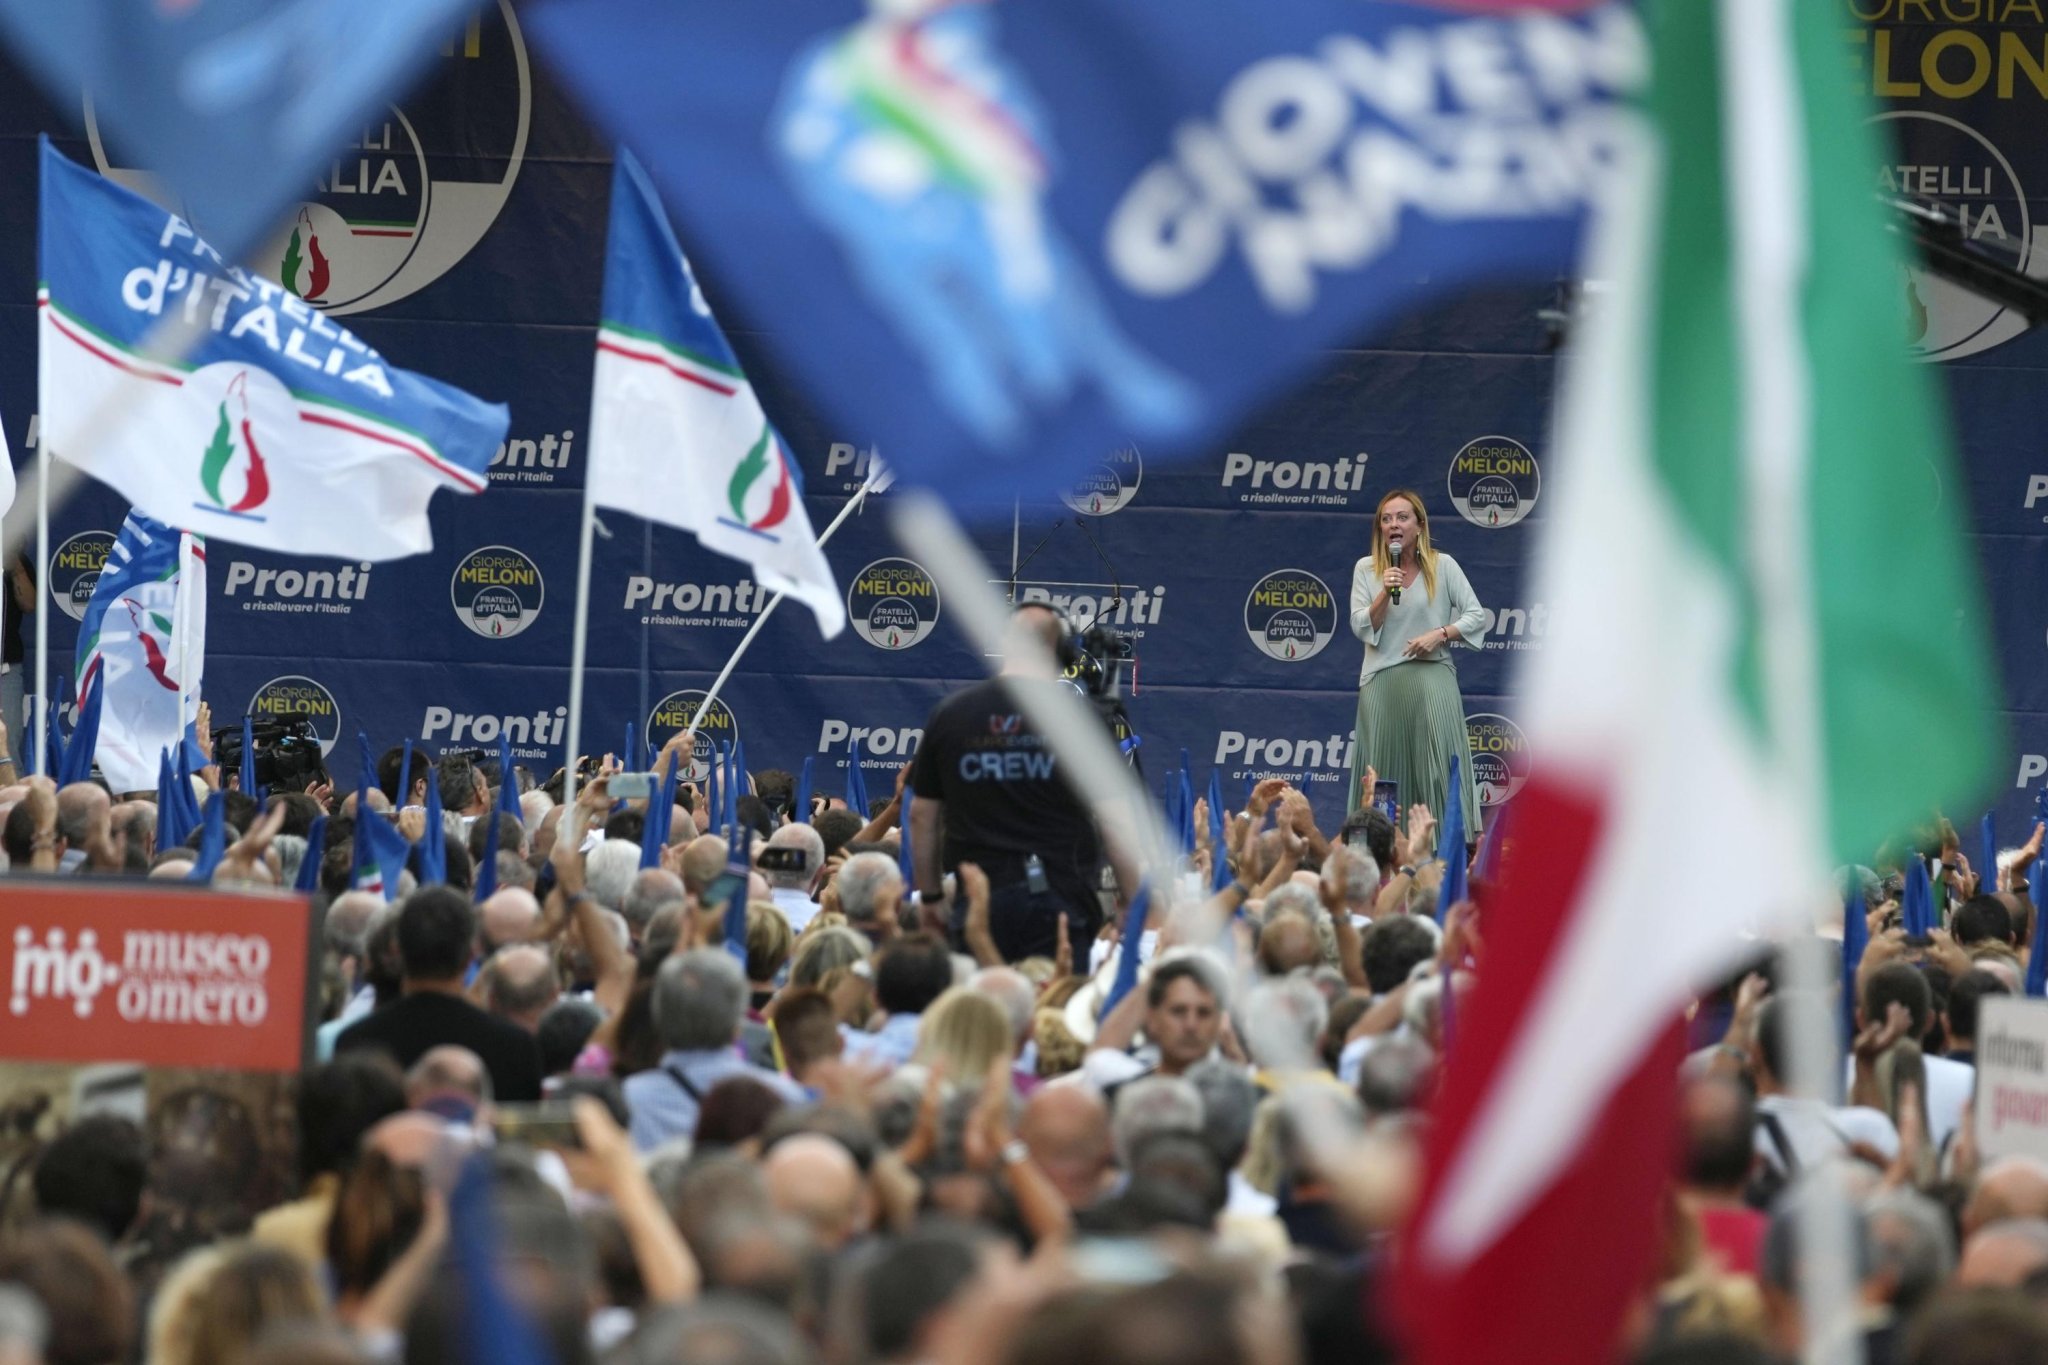 How a party of neo-fascist roots won big in Italy